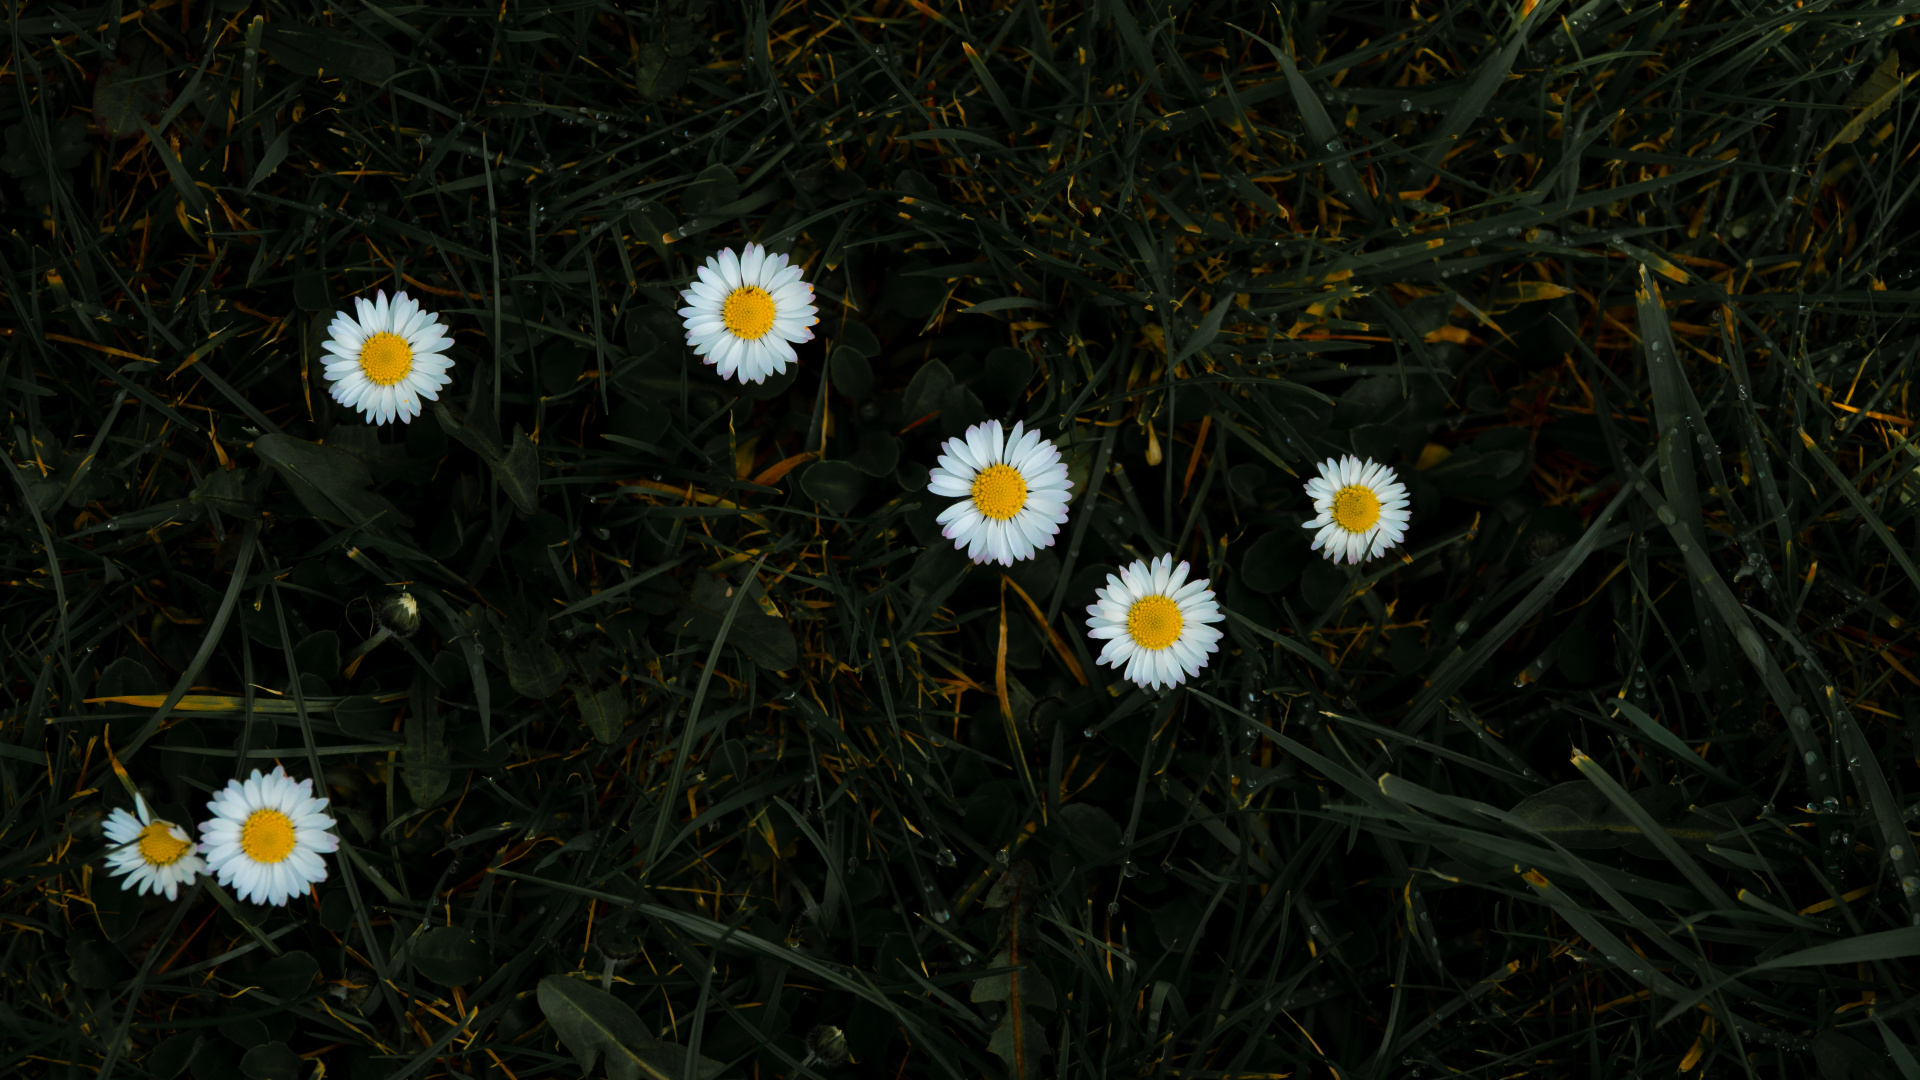 White Daisies in Bloom During Daytime. Wallpaper in 1920x1080 Resolution